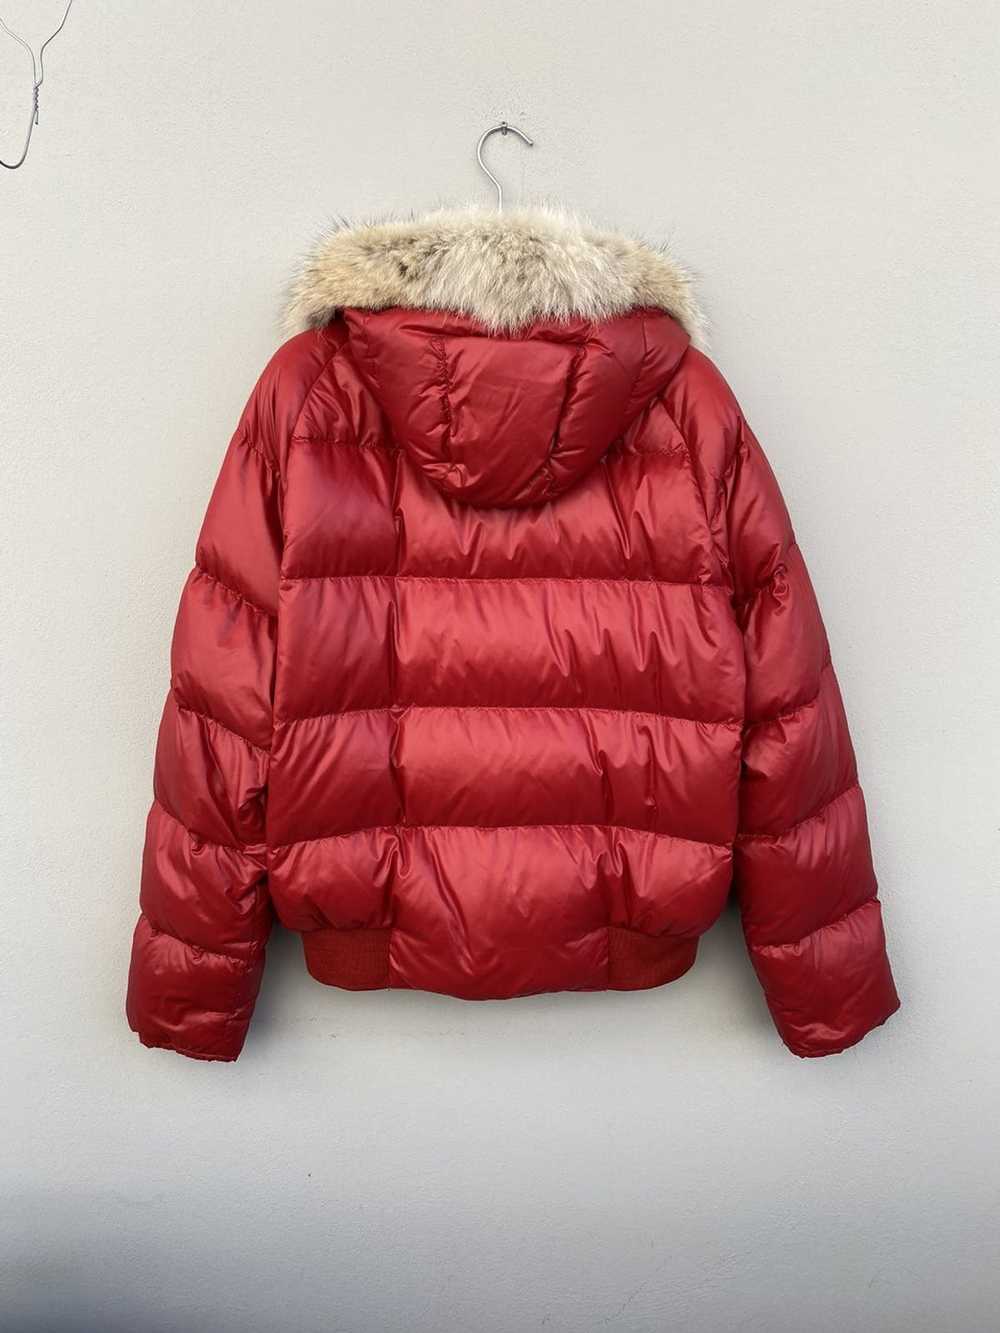 Moncler Moncler Red Down Puffer Jacket - image 4